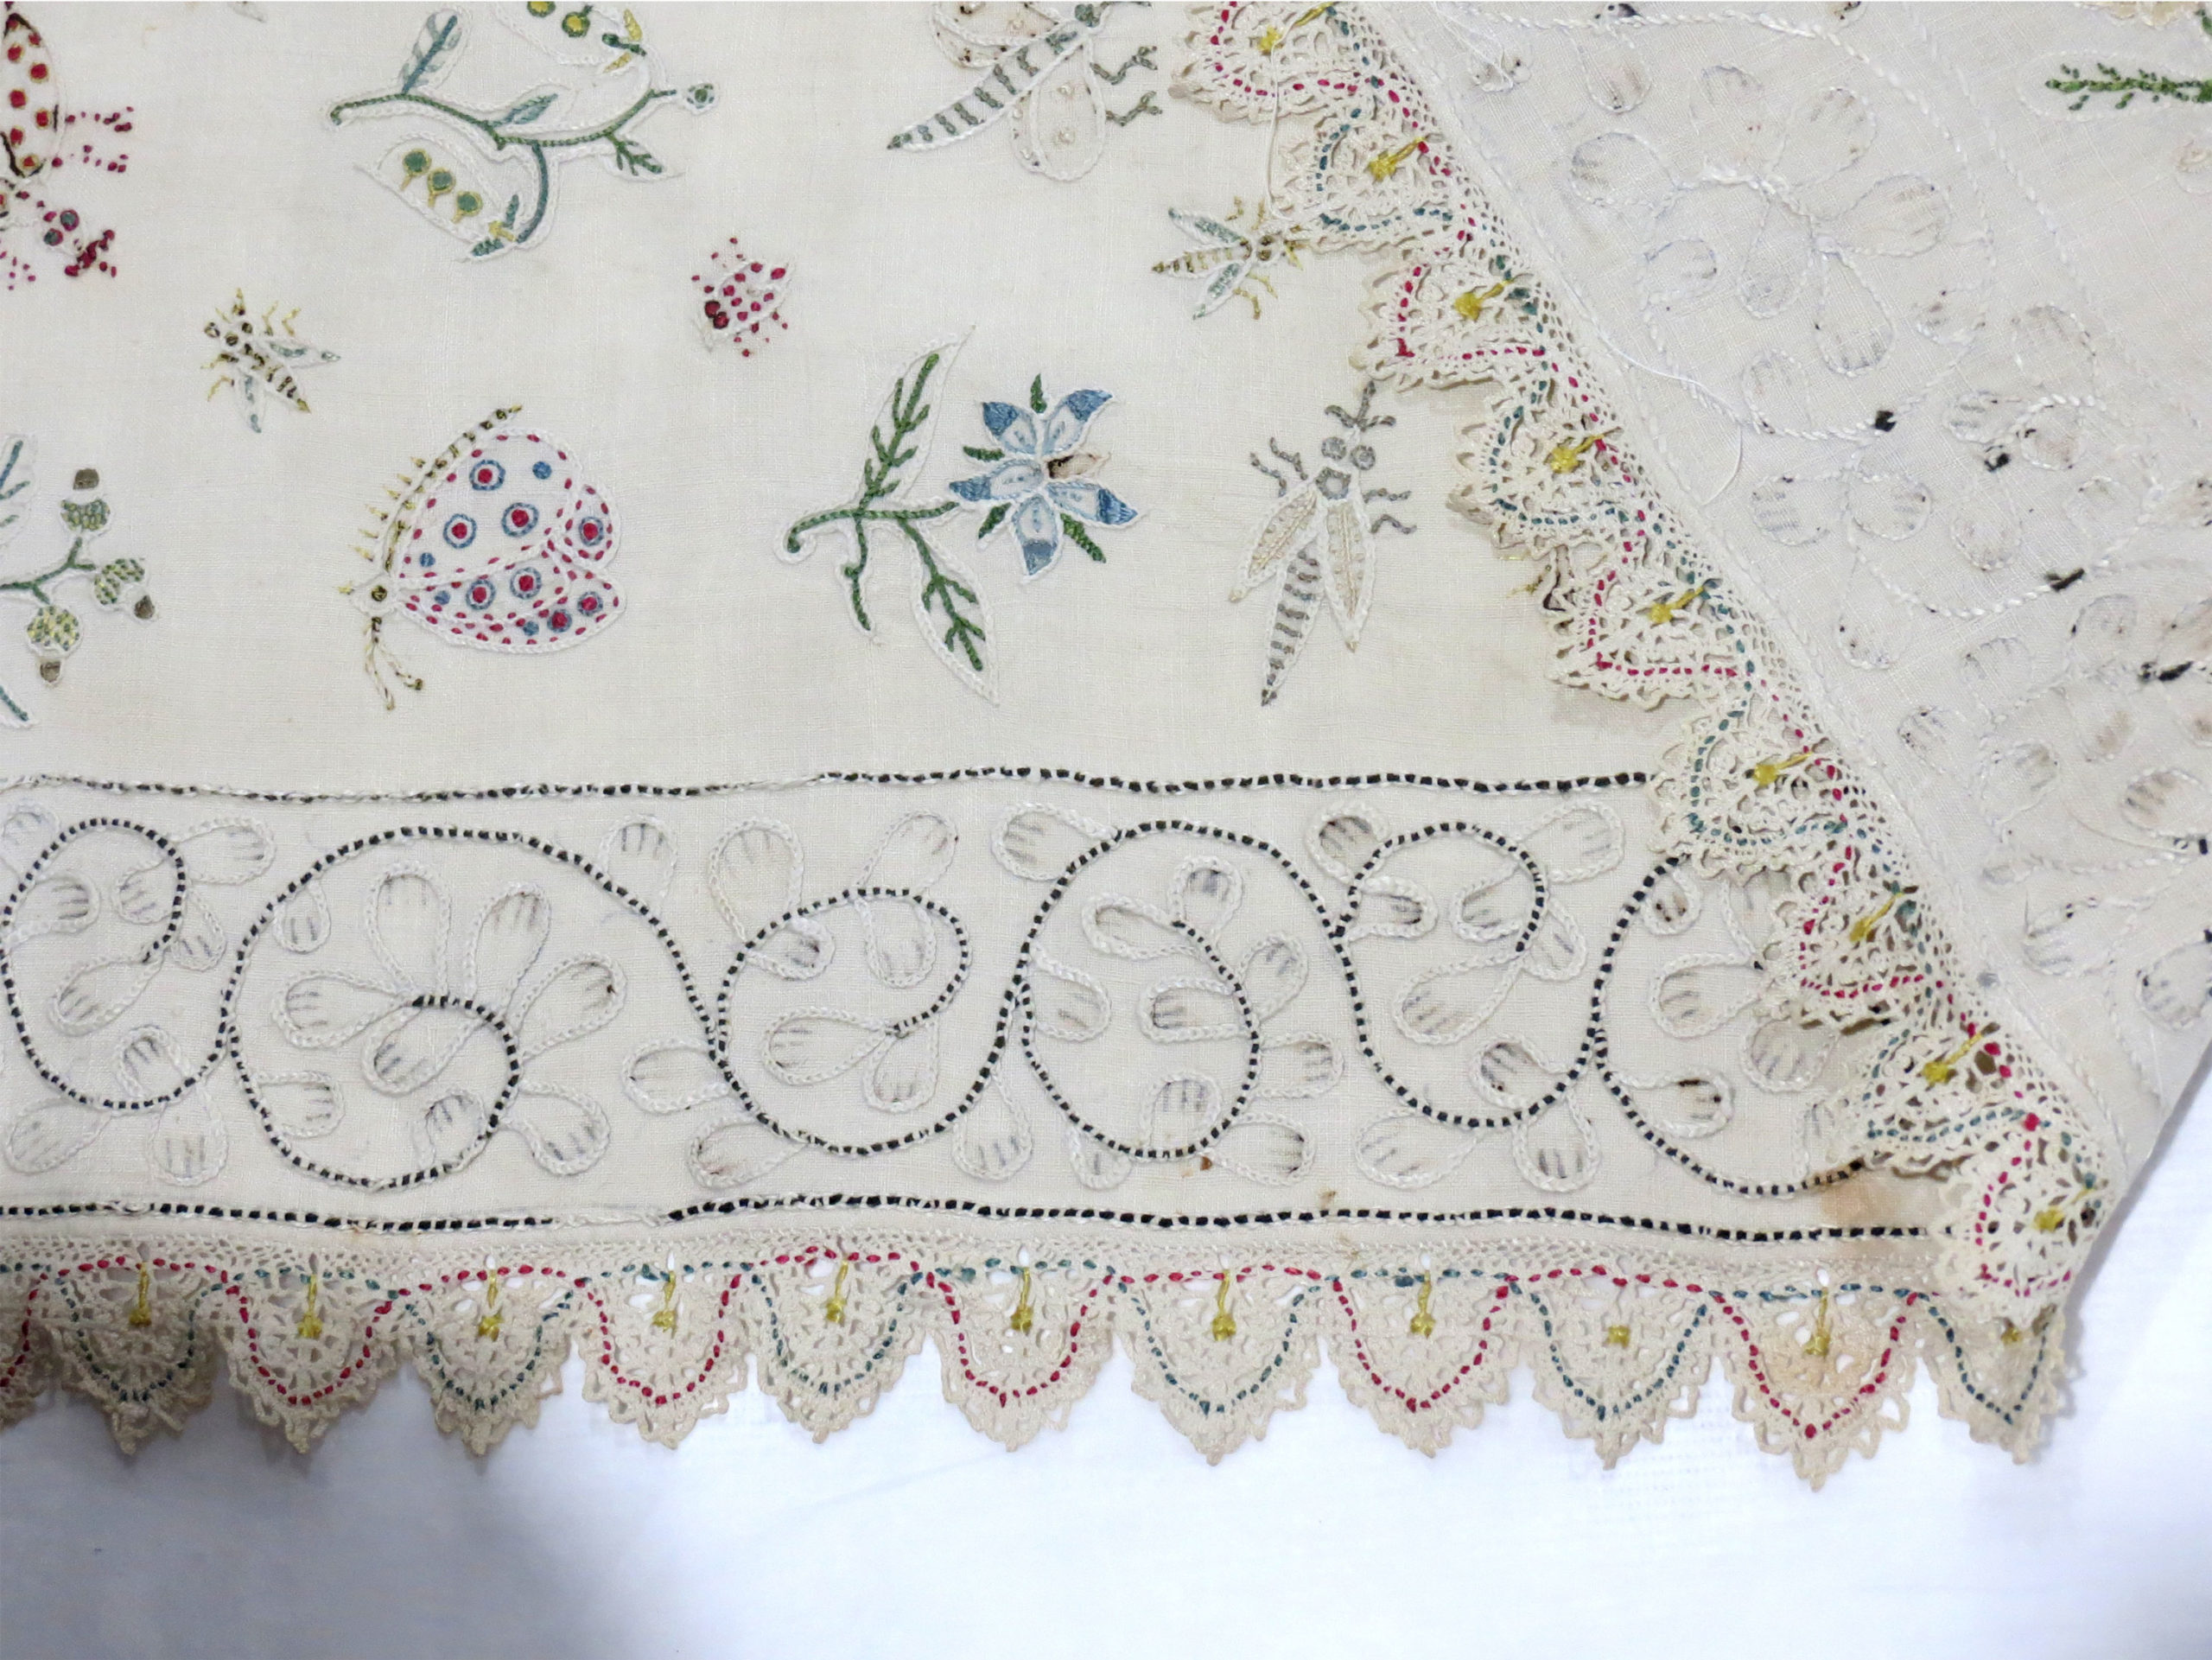 White linen embroidered in coloured silks and white linen threads with bands of birds, insects, flowers, fruit, etc. alternating with narrower bands of scrolls; edging of white bobbin lace run with coloured silks.